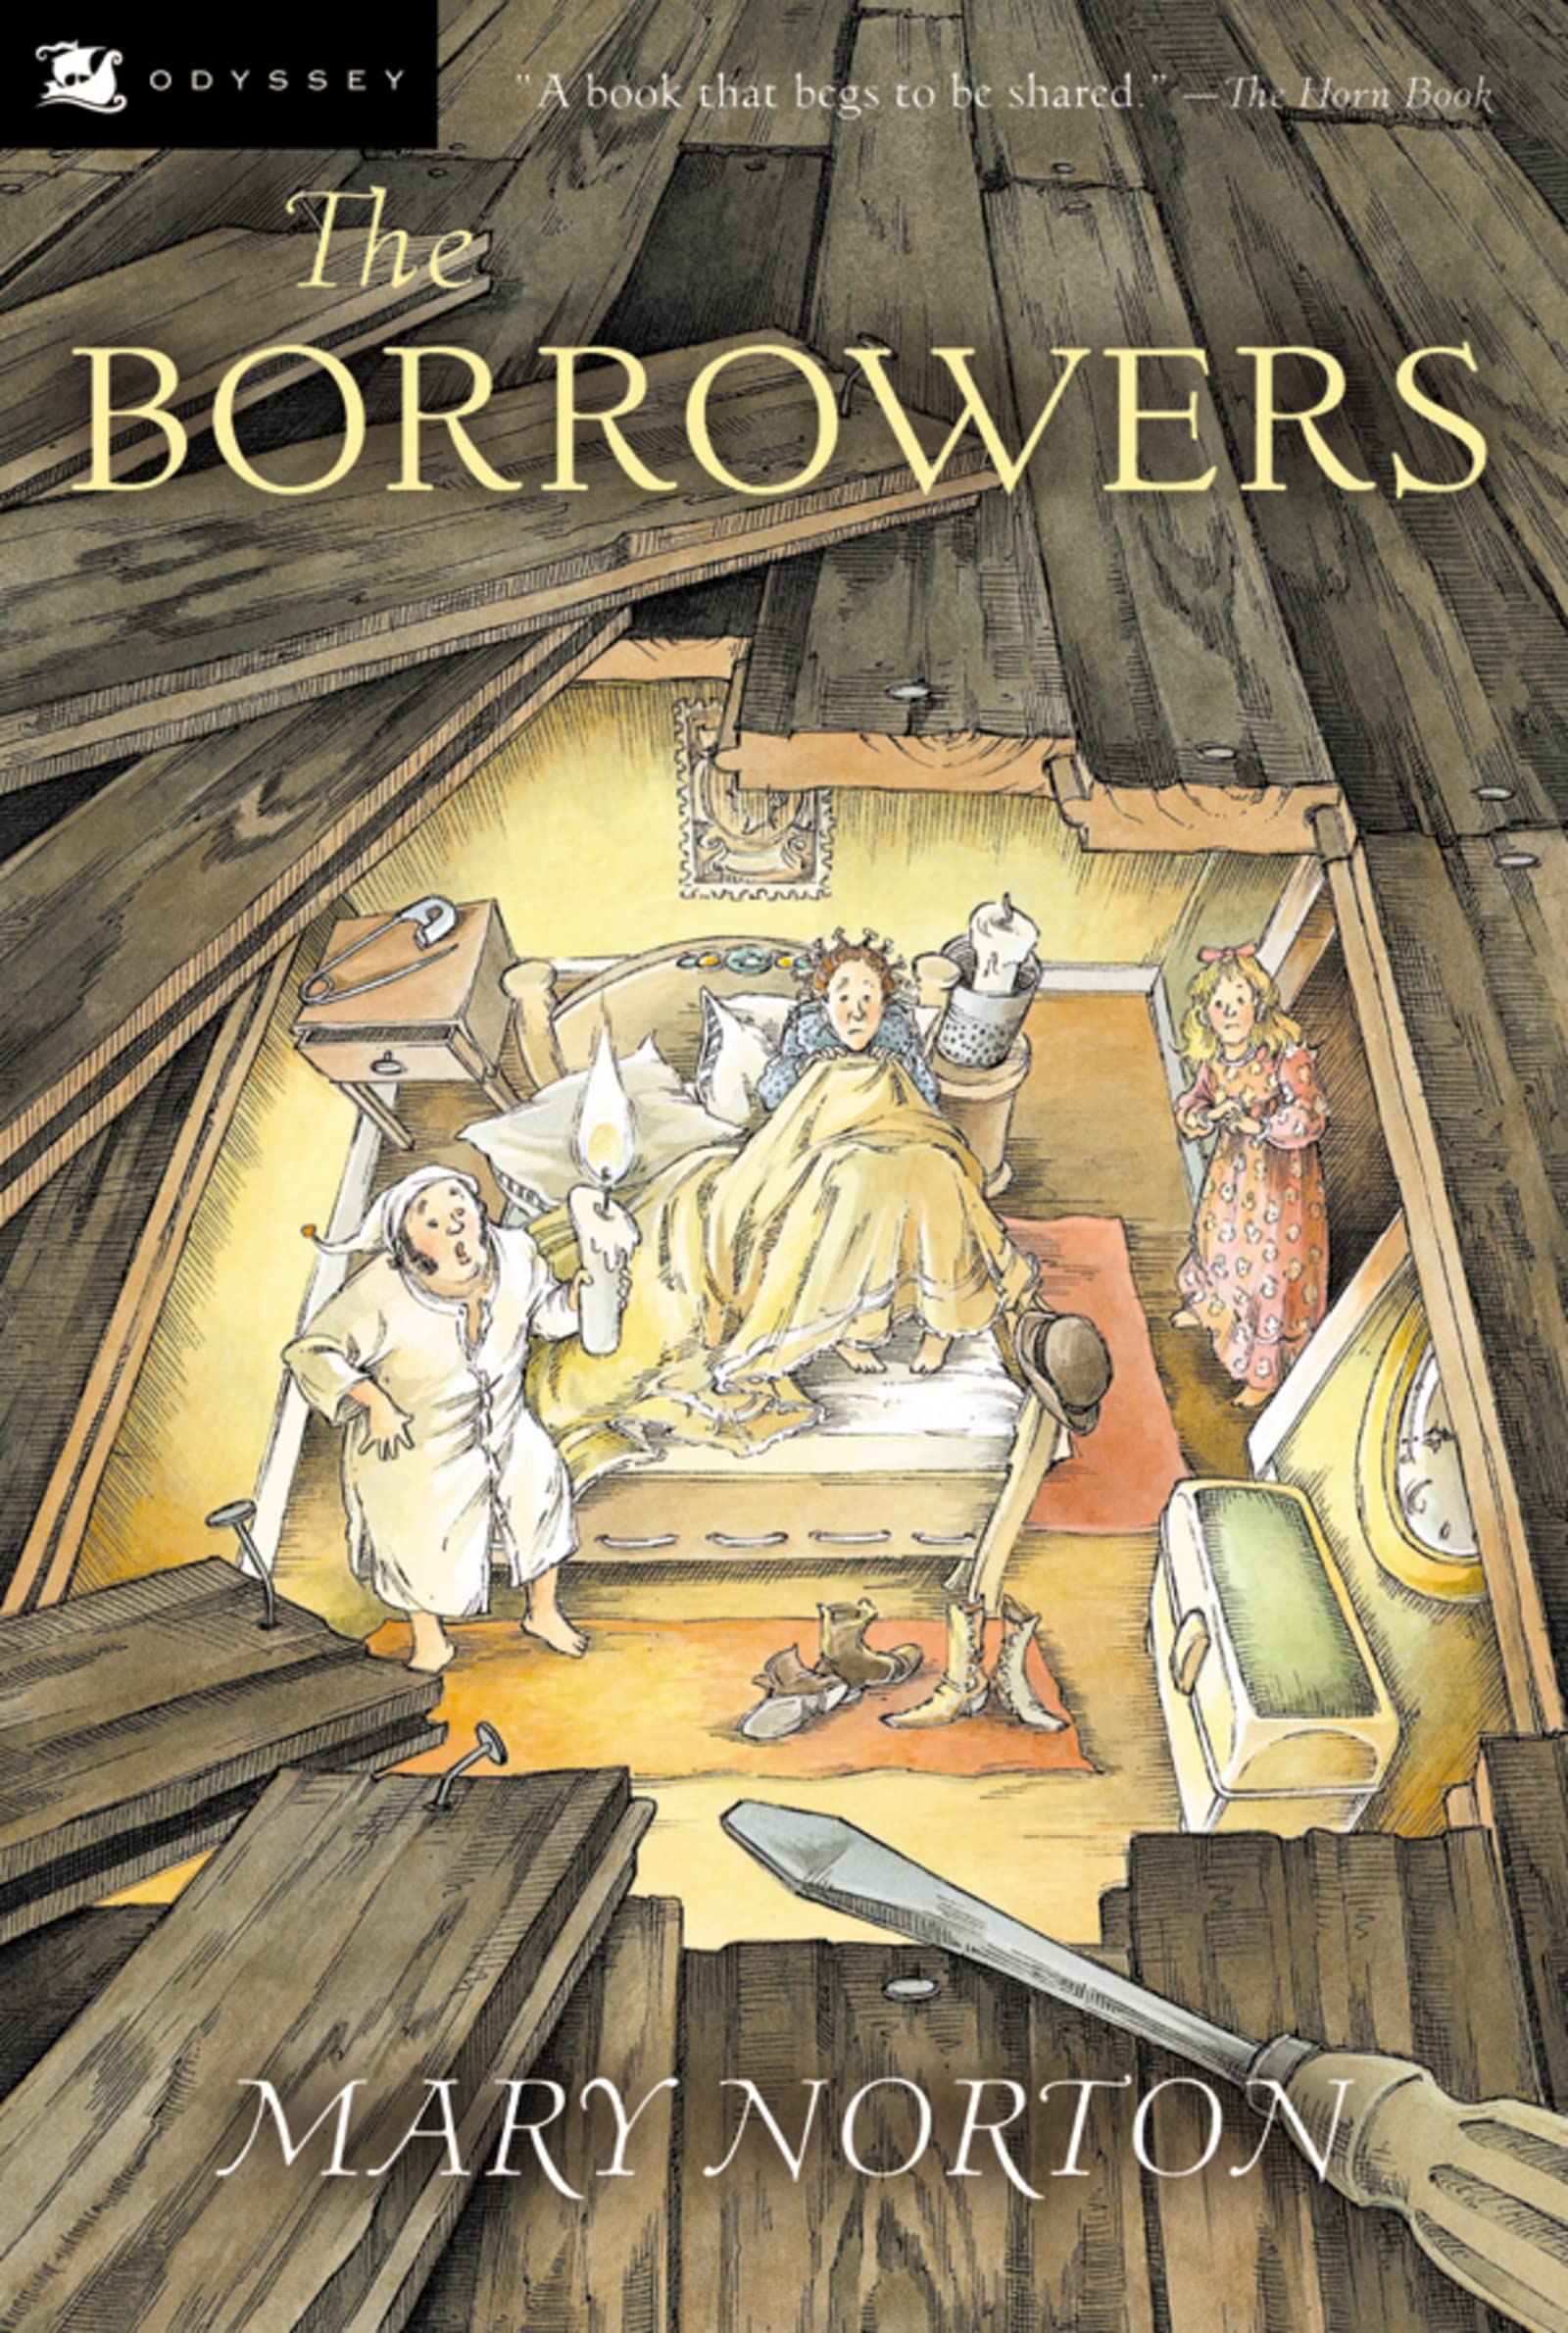 The Borrowers (Paperback)